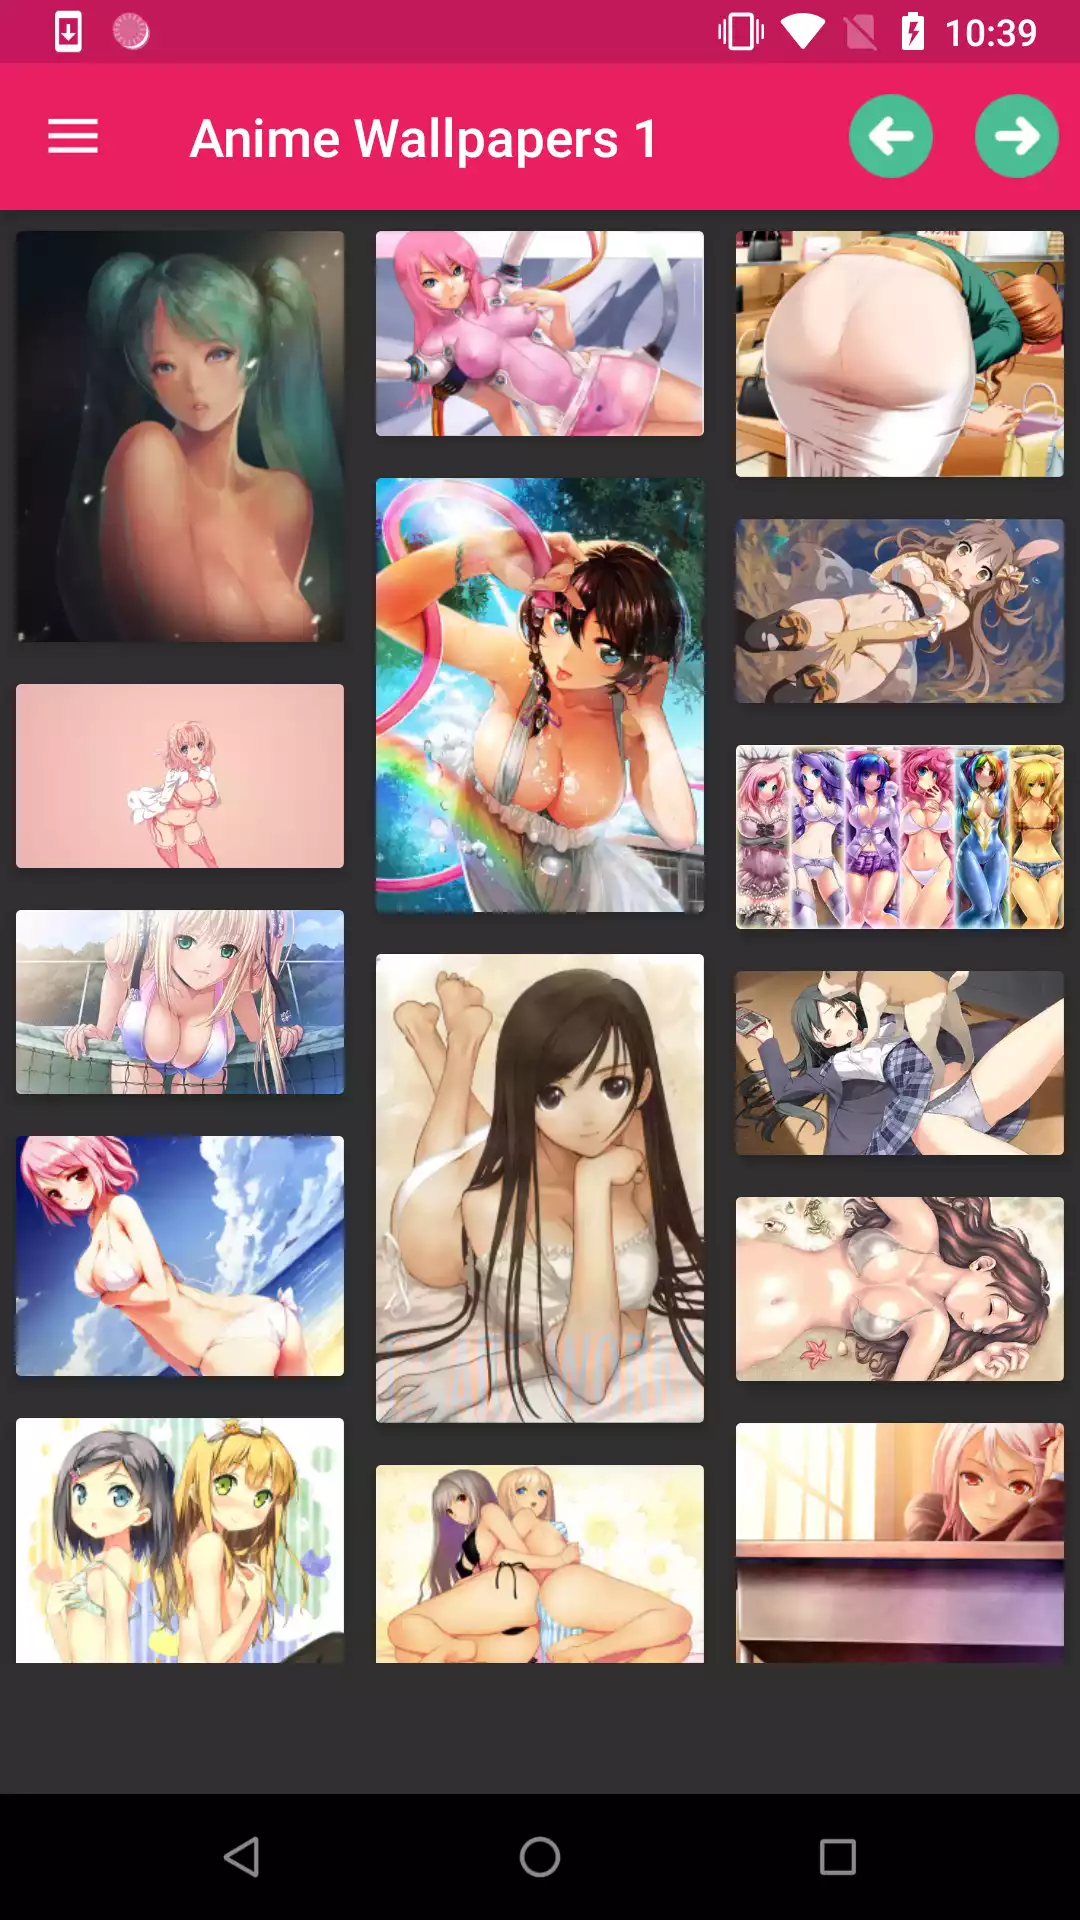 Sexy Anime Girls Wallpapers cosplay,anime,pics,hot,pic,backgrounds,pictures,porn,apk,girls,dreams,screensaver,girl,hantai,hentai,galleries,offline,photo,sexy,download,pornstar,wallpapers,shrinking